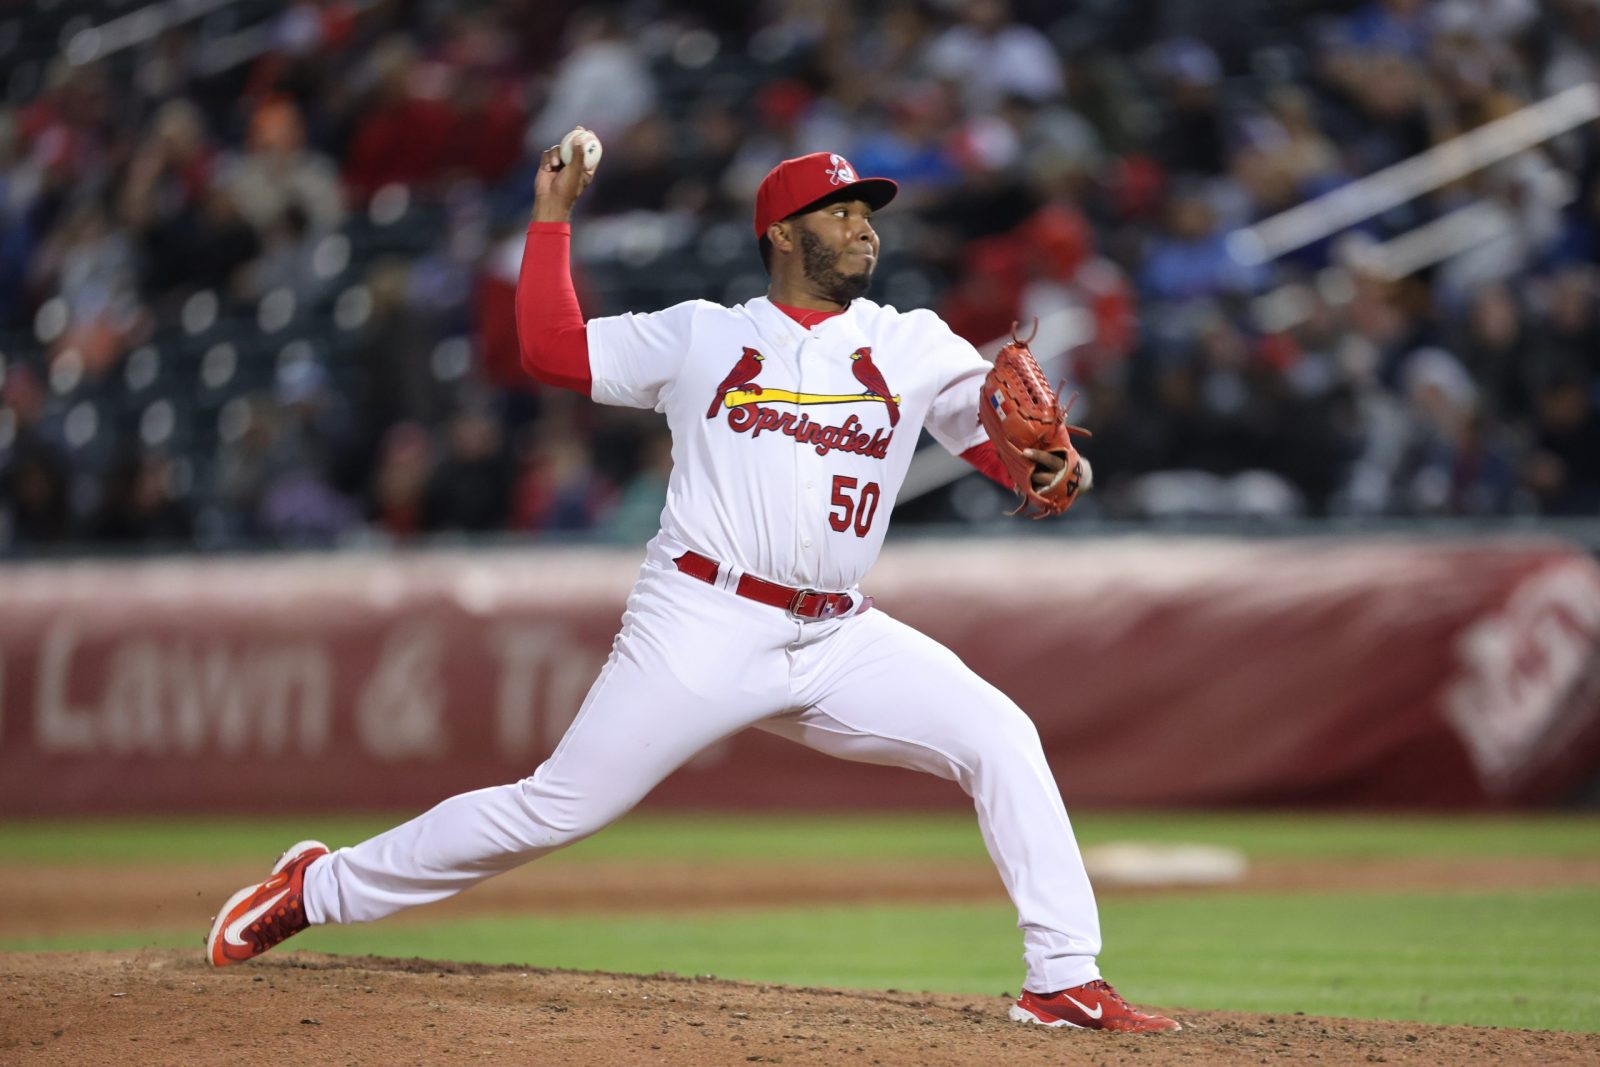 A baseball player in a Springfield Cardinals uniform pitches the ball